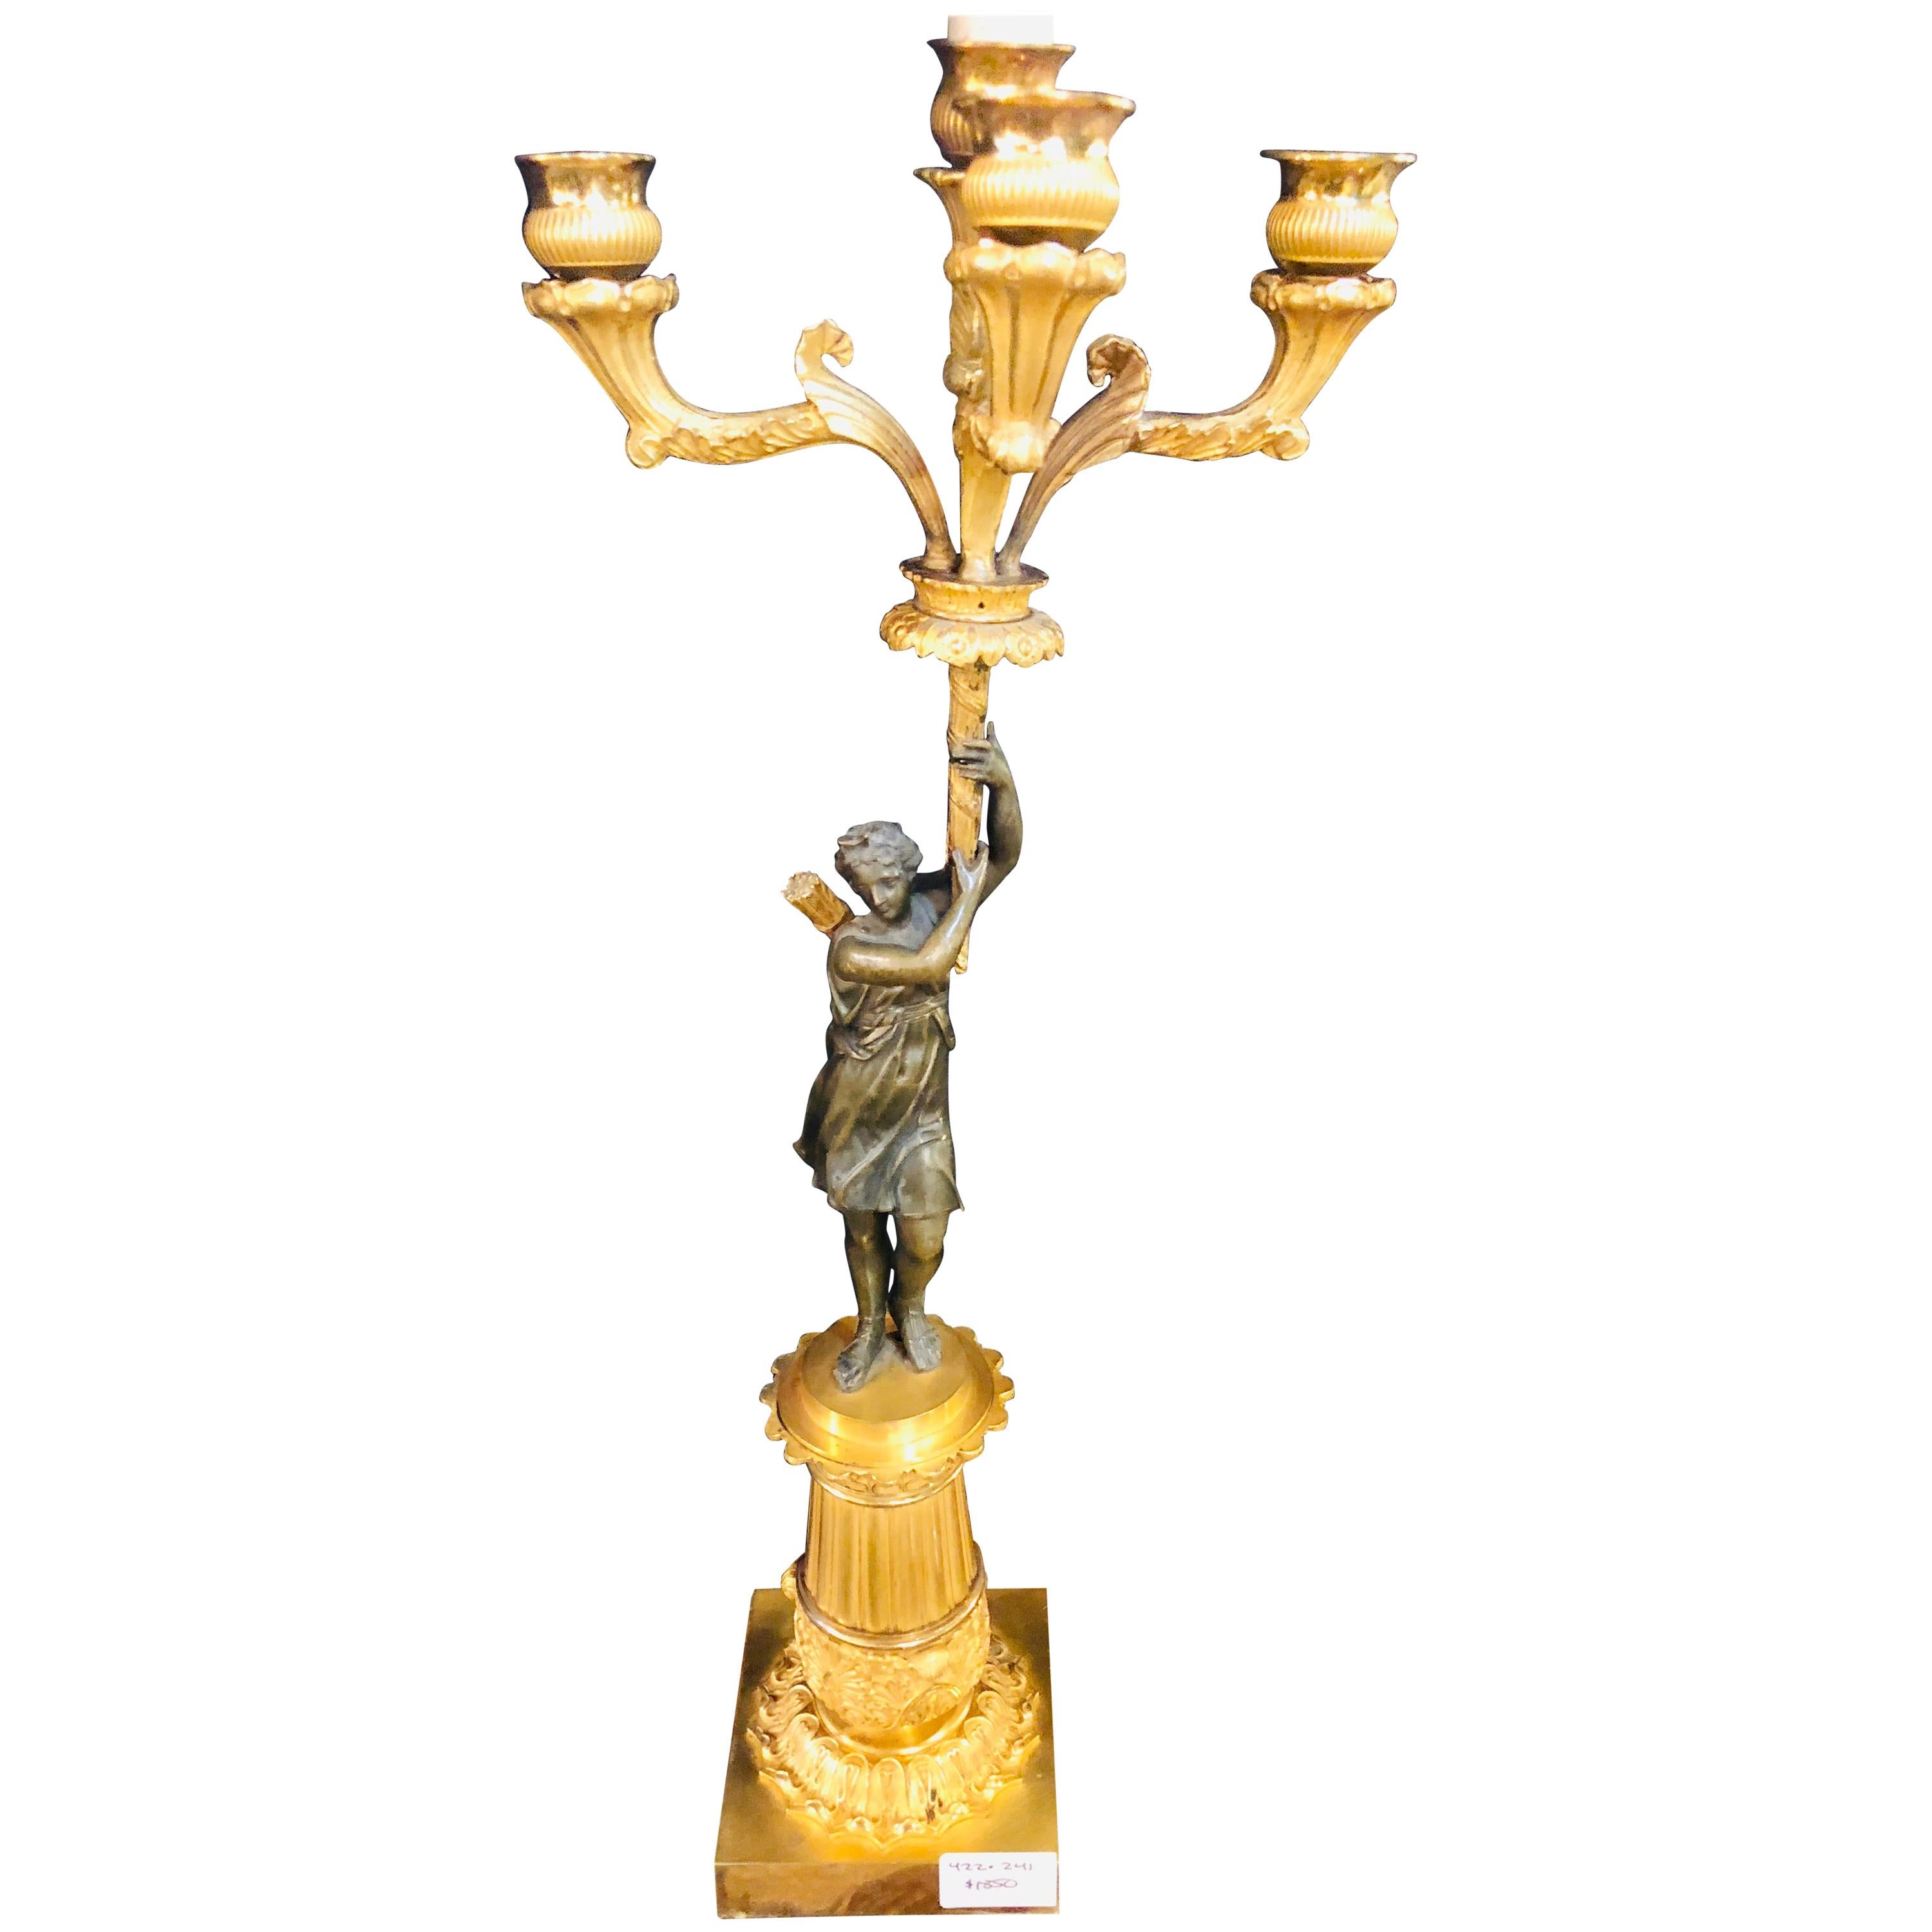 An Empire doré bronze candelabra lamp having a patinated woman mounted as a lamp. Part of our recent acquisition of fifty year collection from a Secaucus NJ antique shop comes this finely cast bronze candelabra lamp with stunning detailed shade.